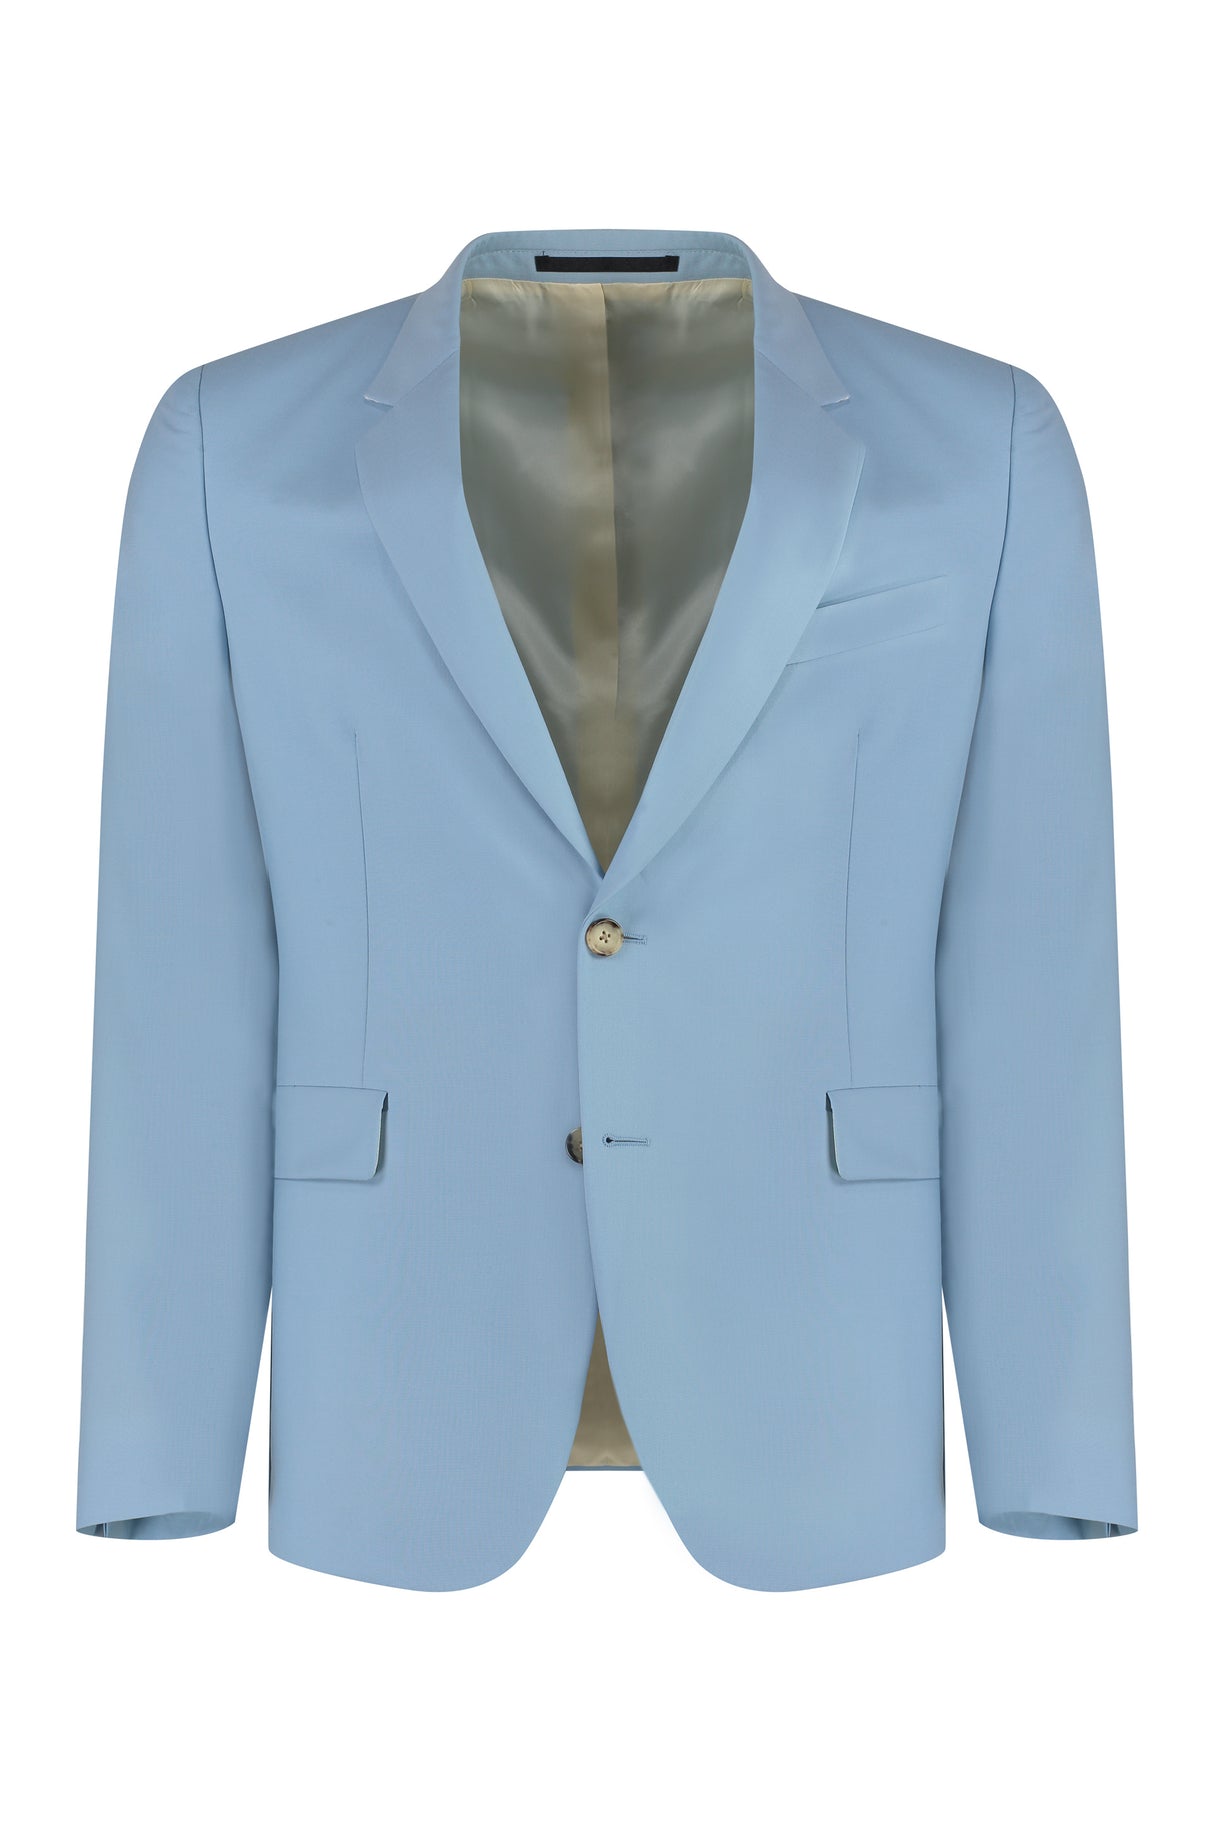 PAUL SMITH Men's Light Blue Wool and Mohair Suit for SS23